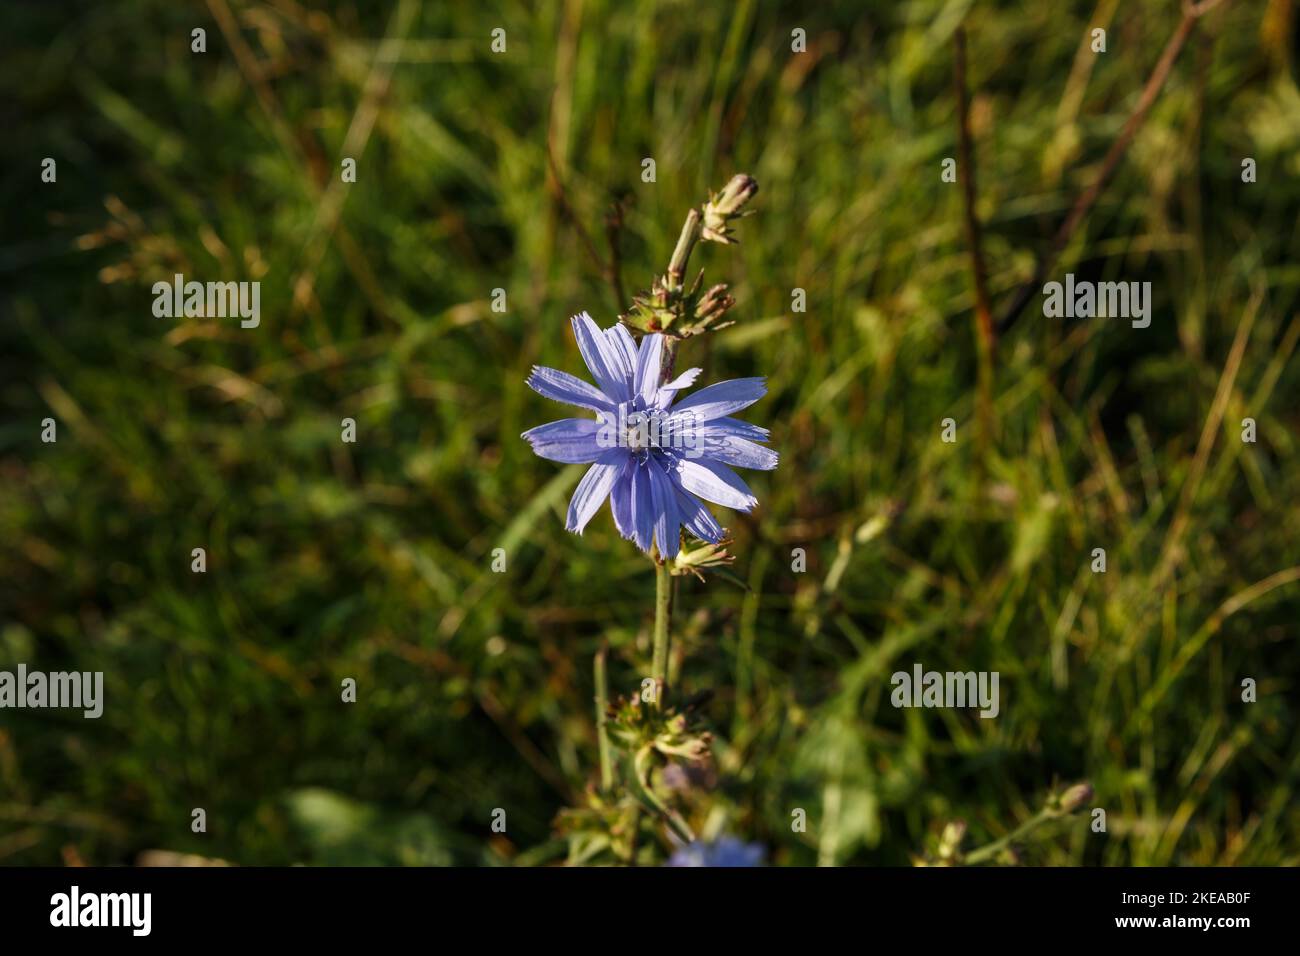 Common Chicory or Cichorium intybus. Blue chicory flowers growing in the meadow. Stock Photo